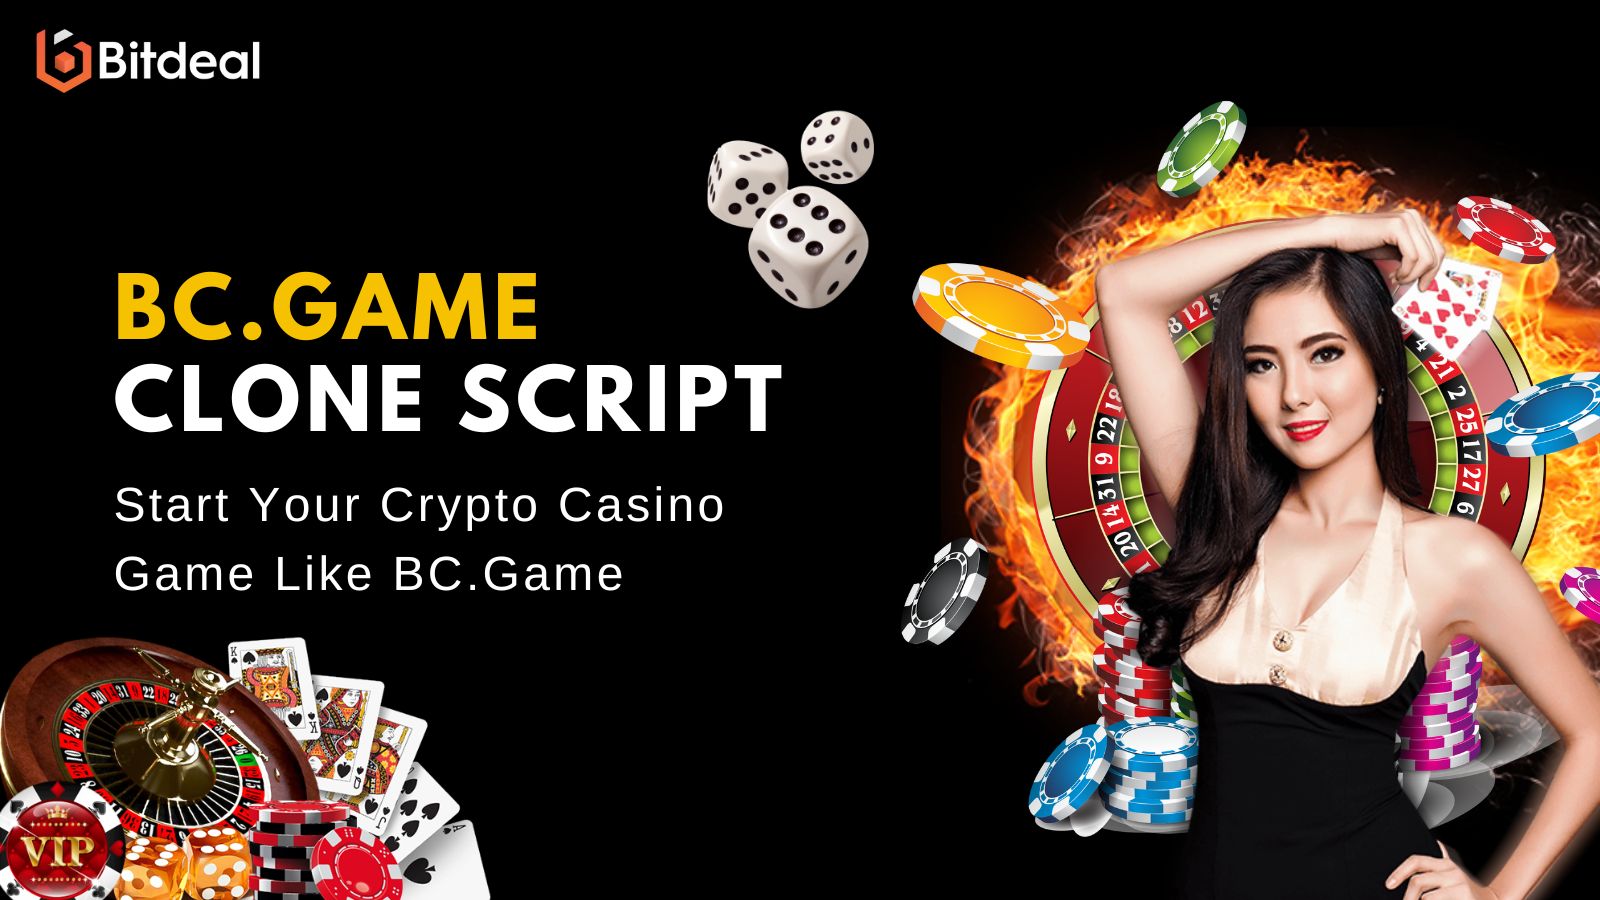 10 Facts Everyone Should Know About BC.Game online casino in Italy